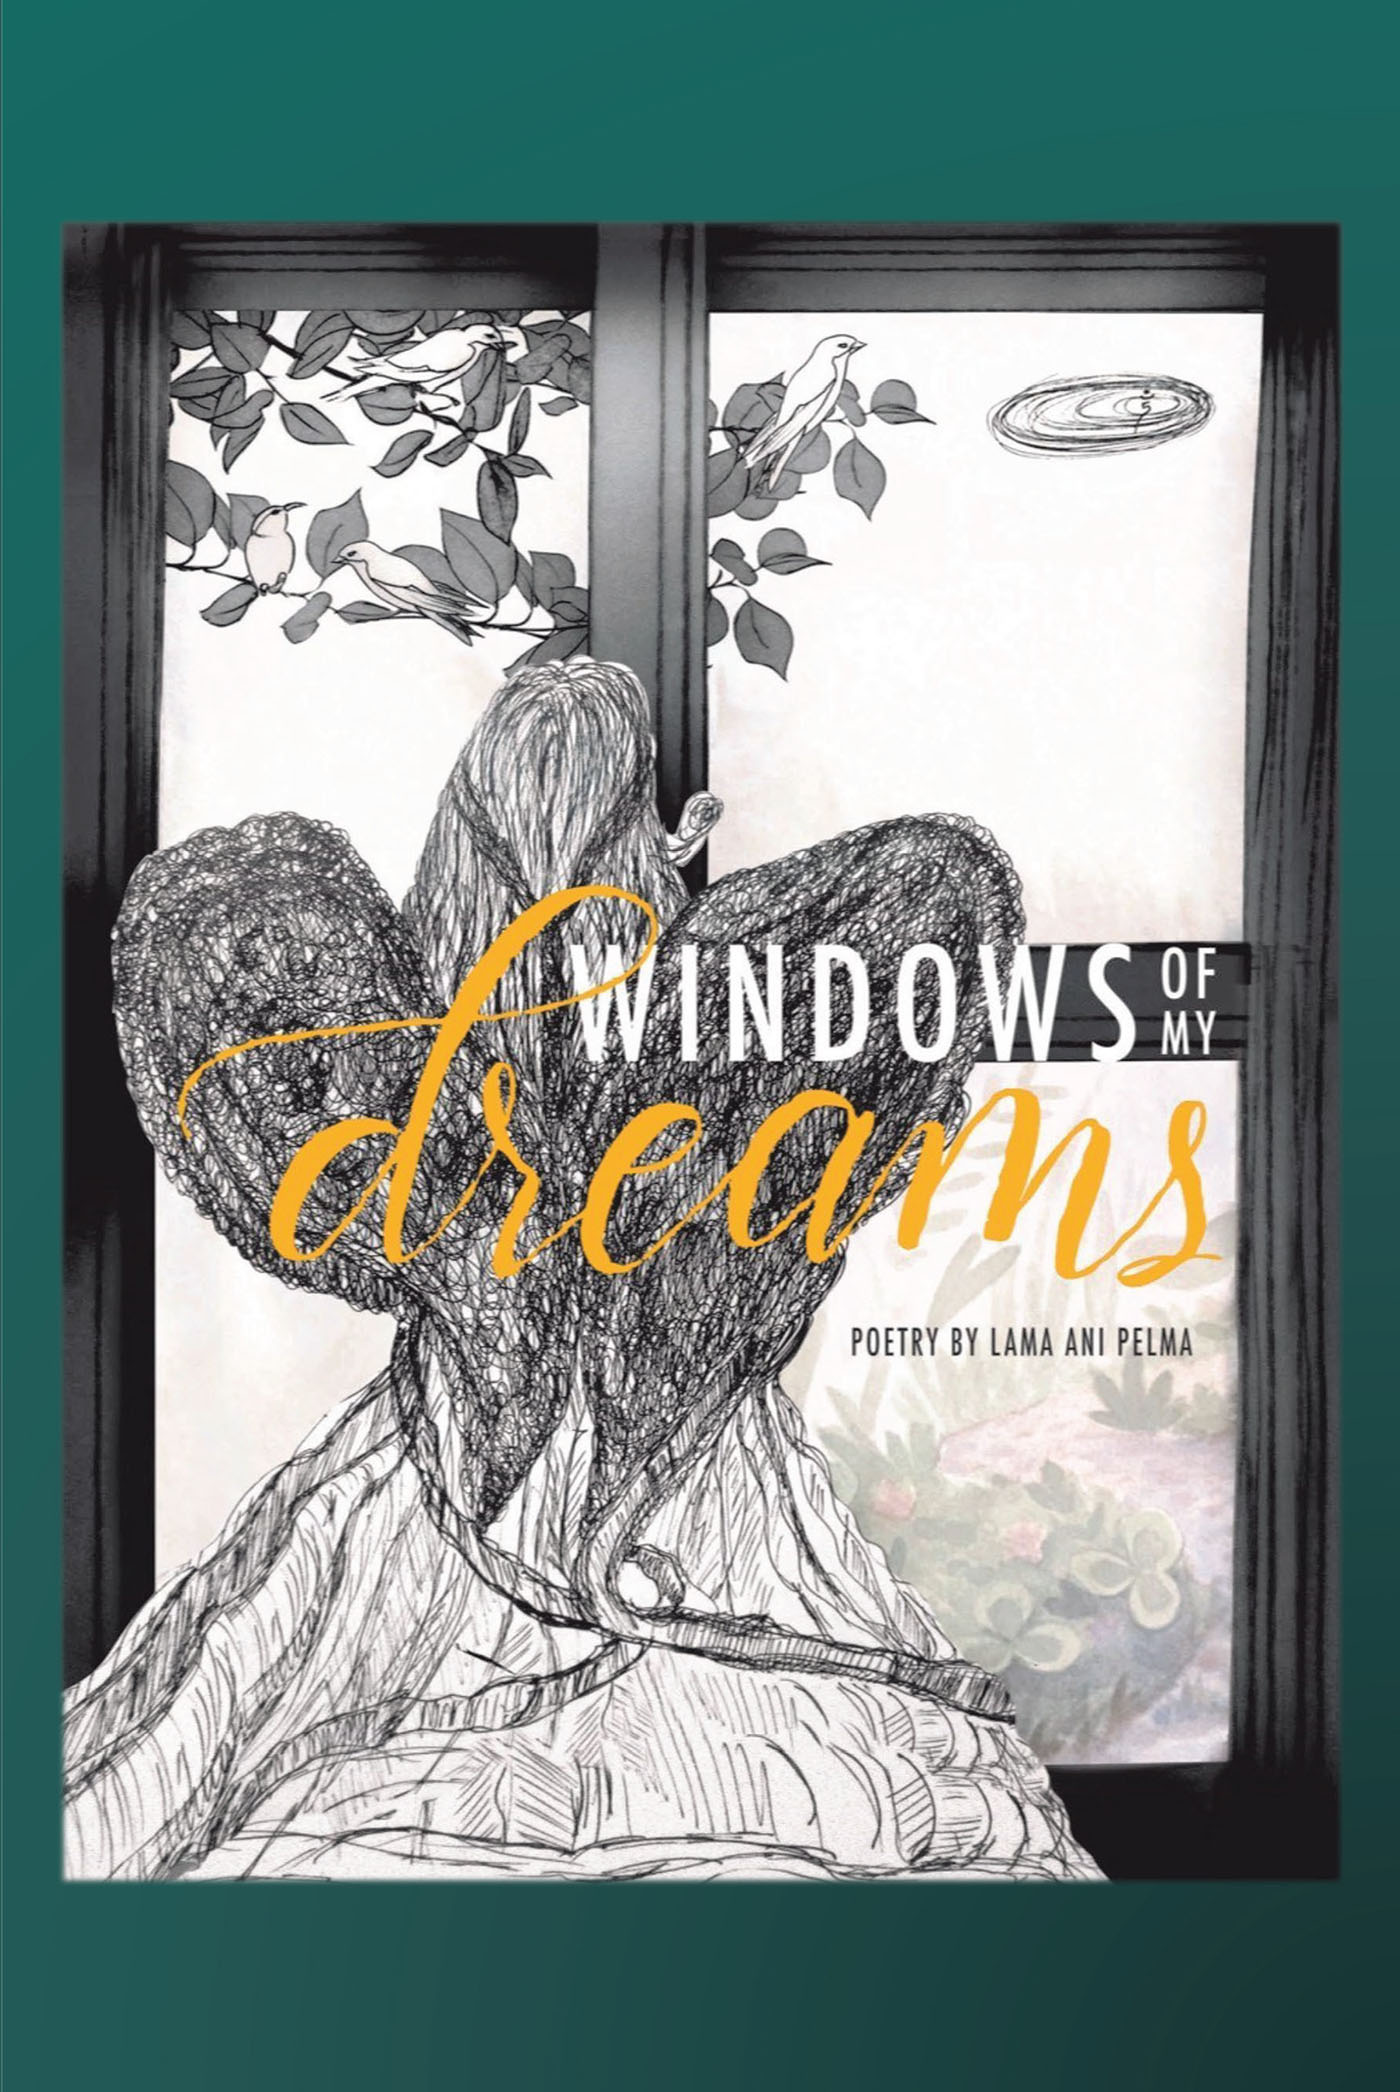 Lama Ani Pelma’s Newly Released "Windows of My Dreams" is an Introspective Study of Life, Faith, and the Nature of Reality